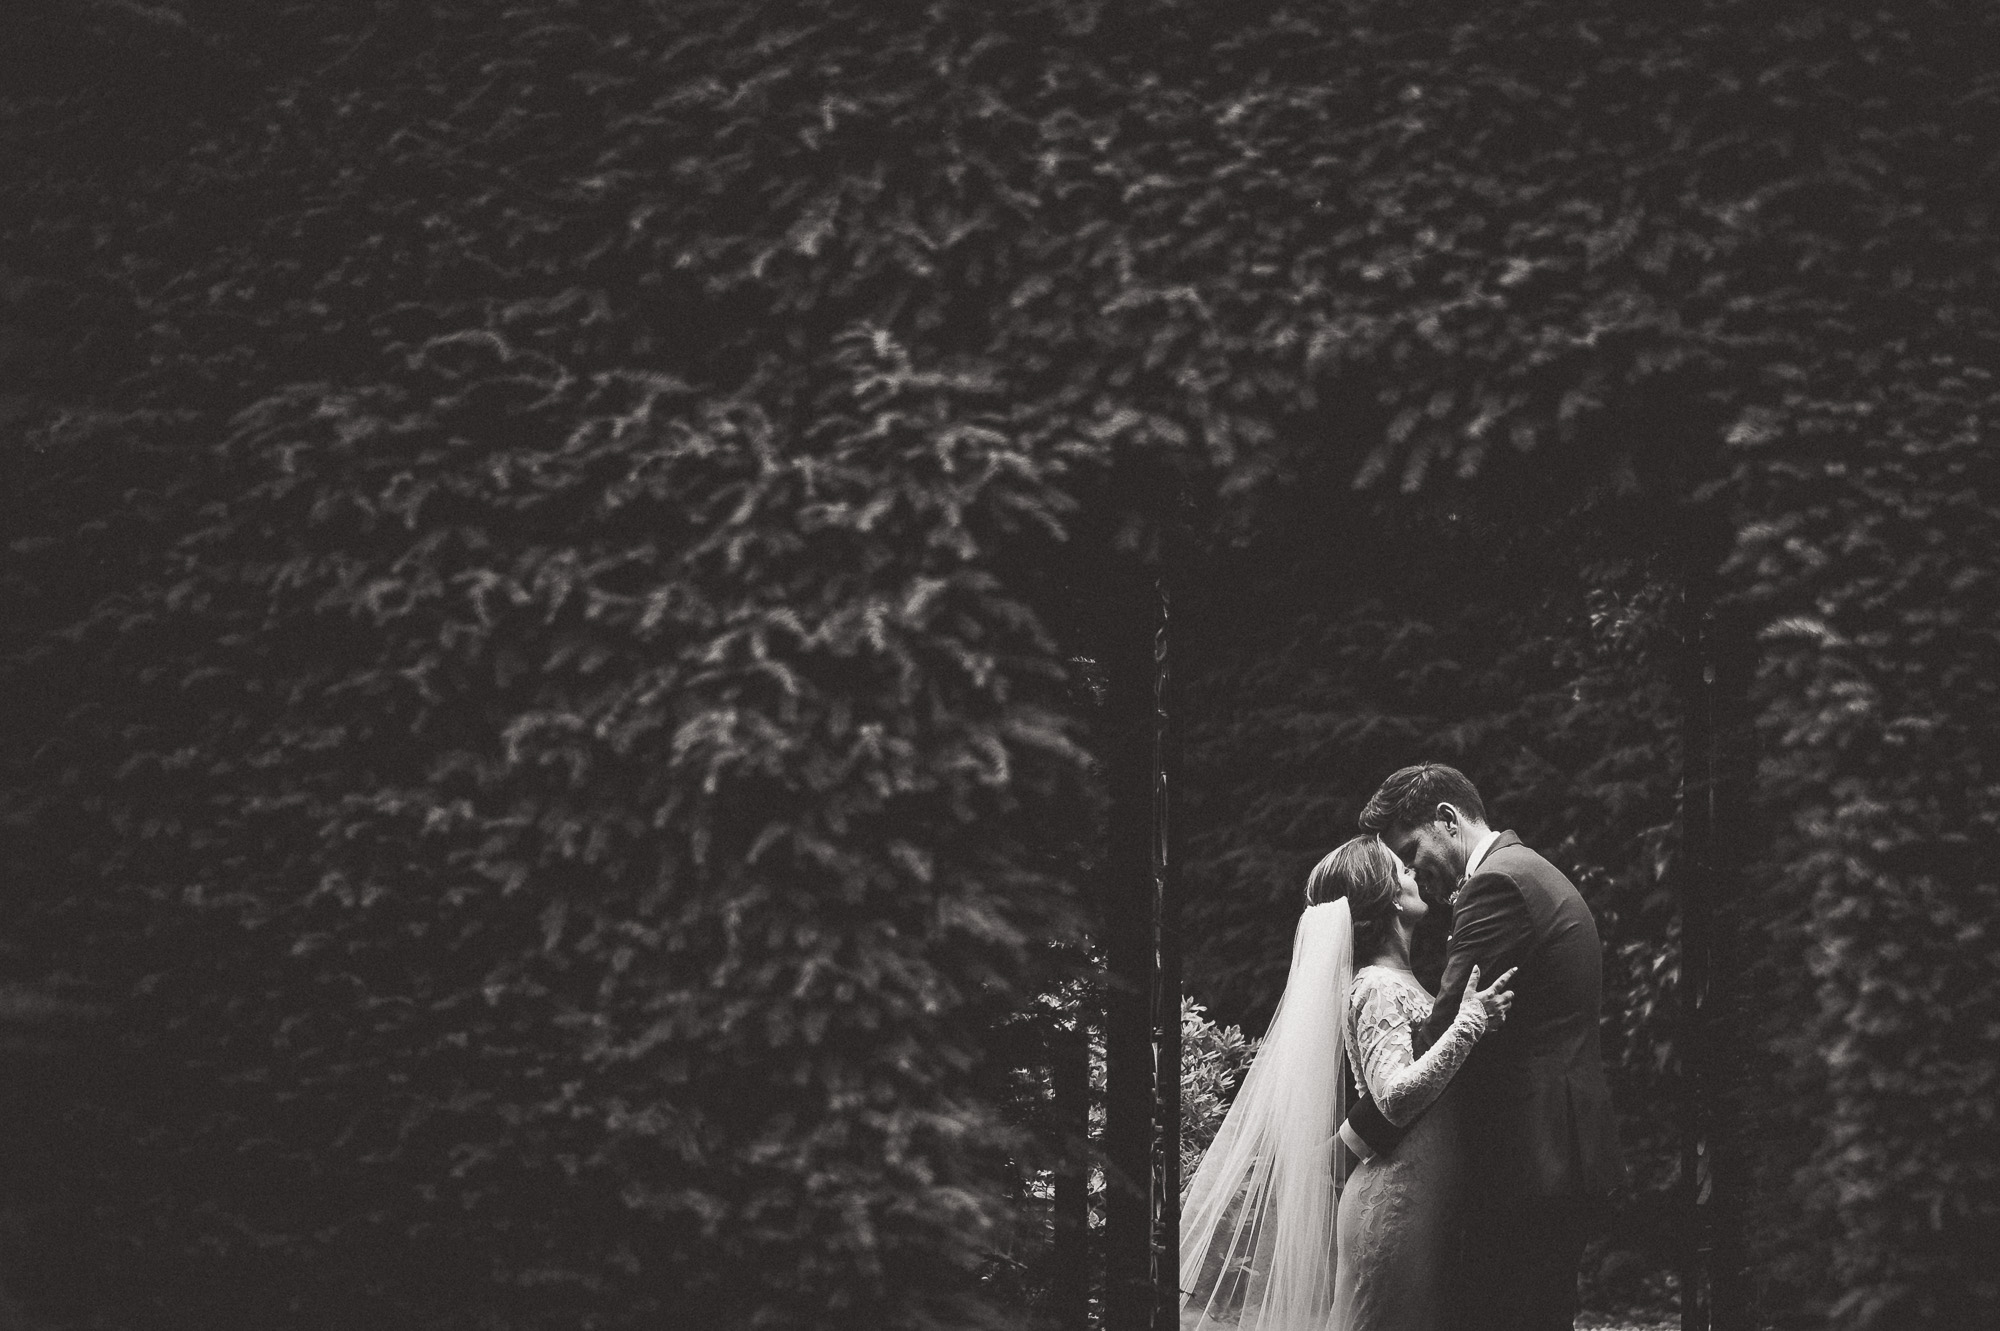 A wedding photo of a bride and groom kissing beneath an ivy covered archway, captured by a skilled wedding photographer.